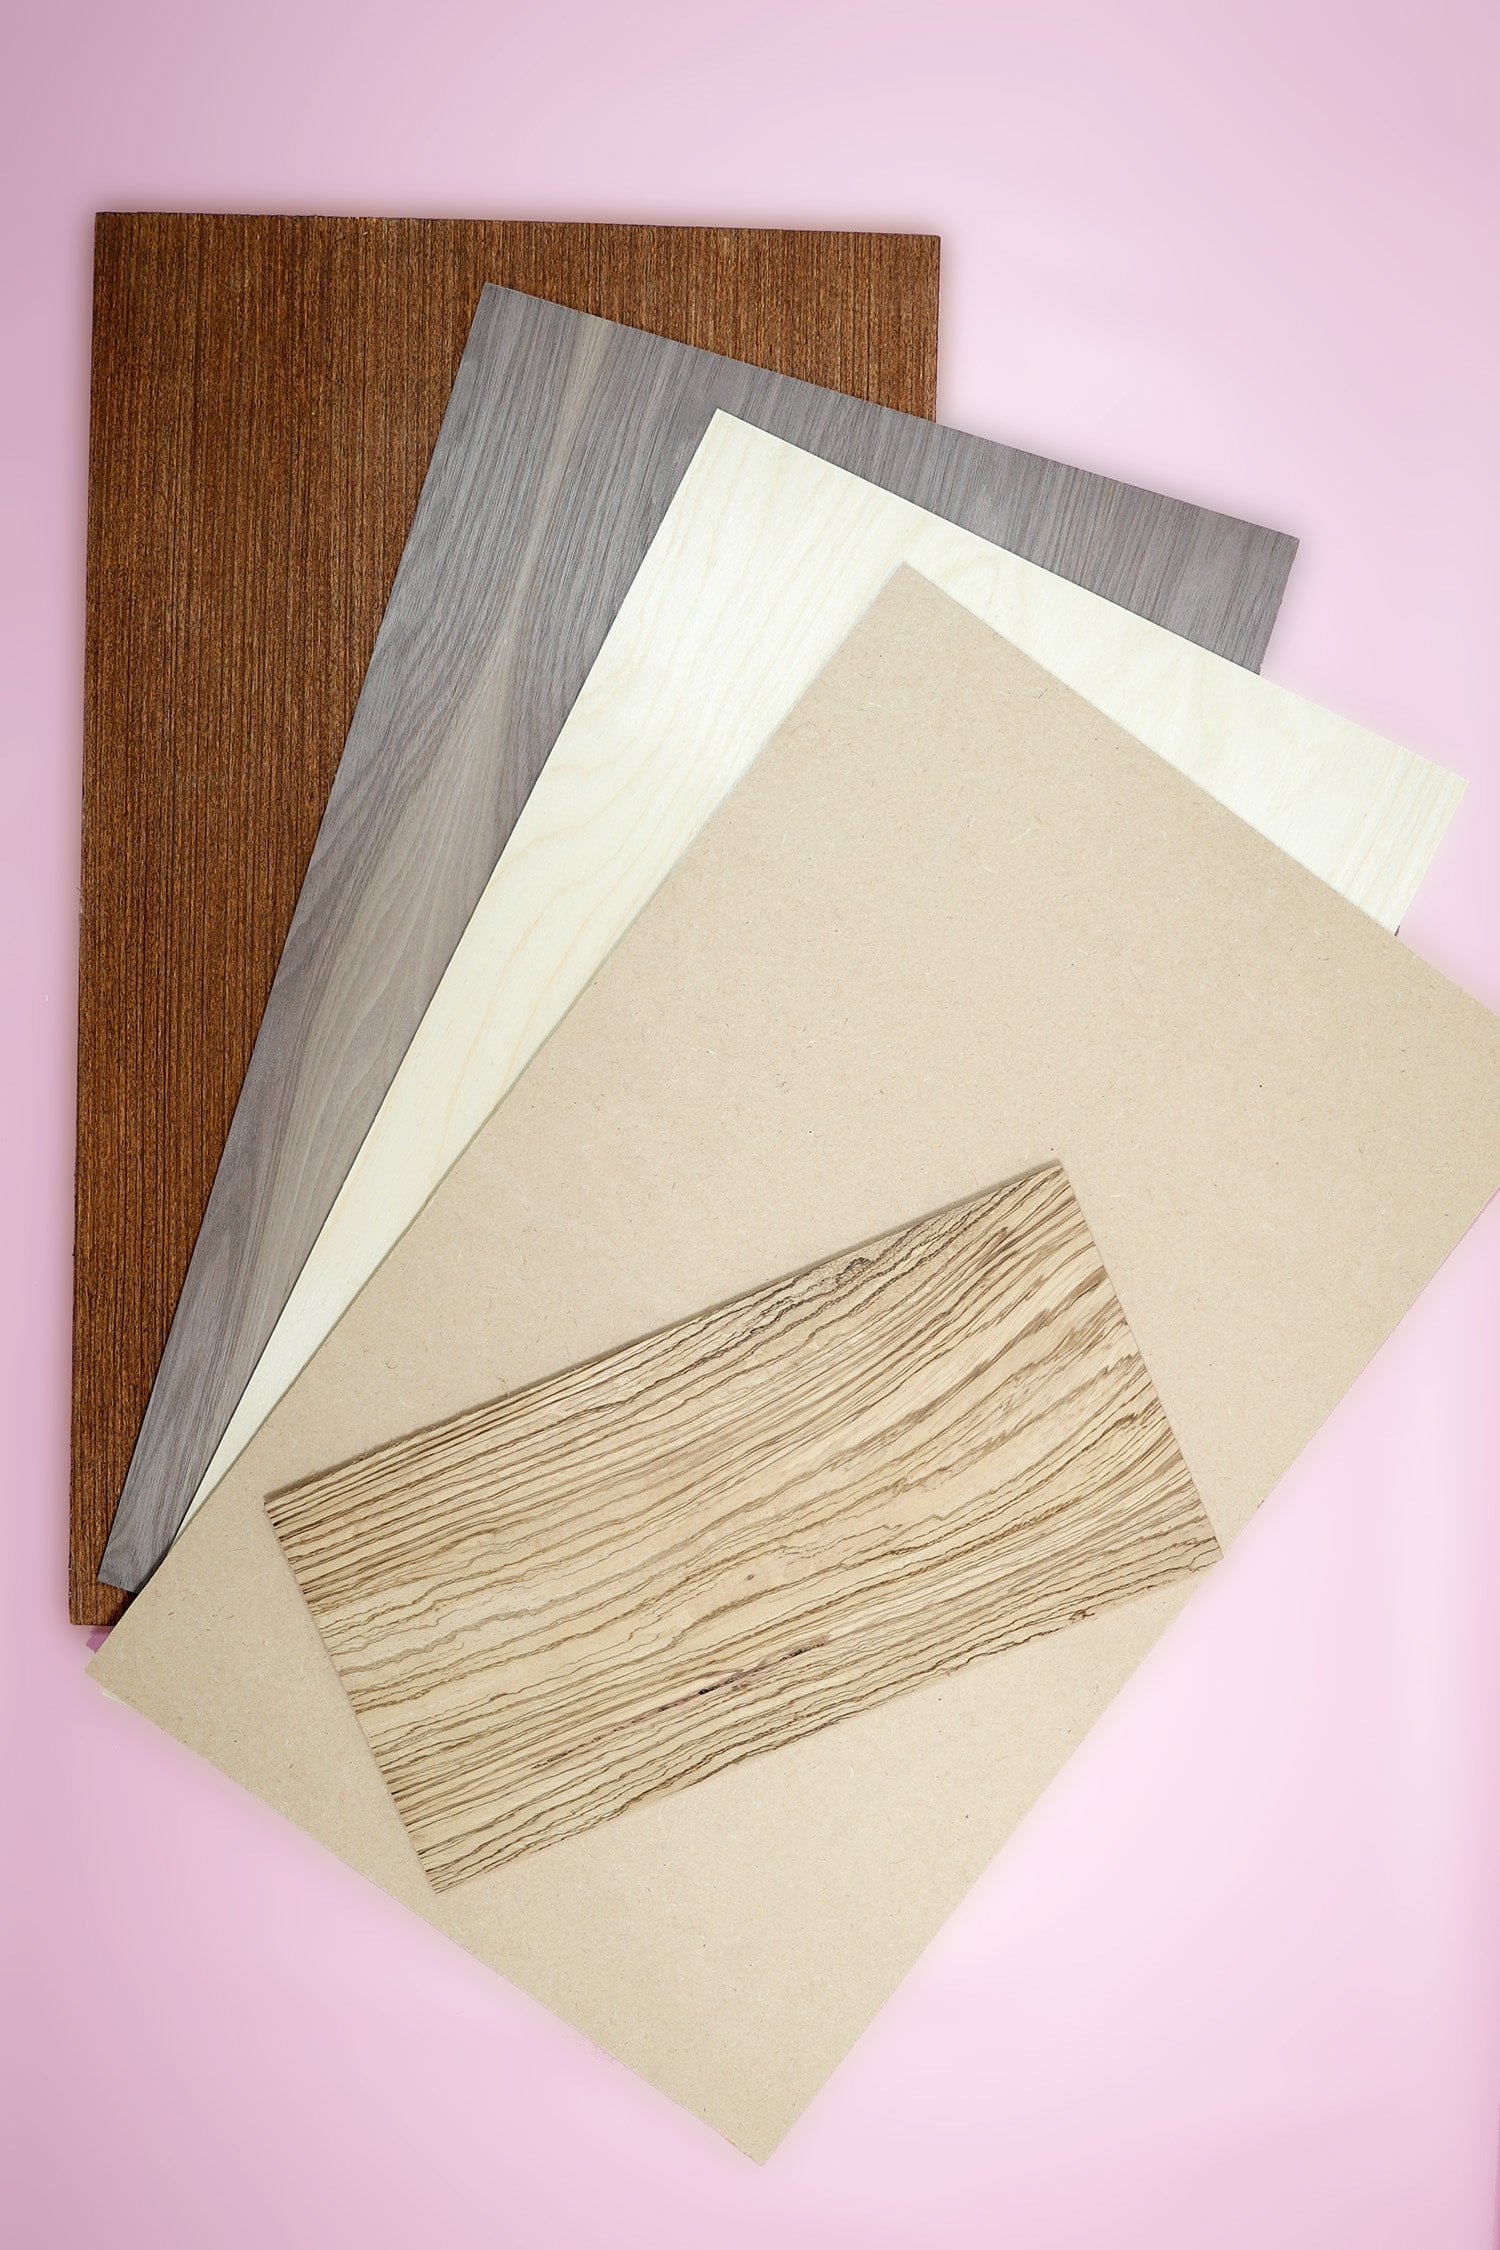 Five different types of wood sheets on a pink background